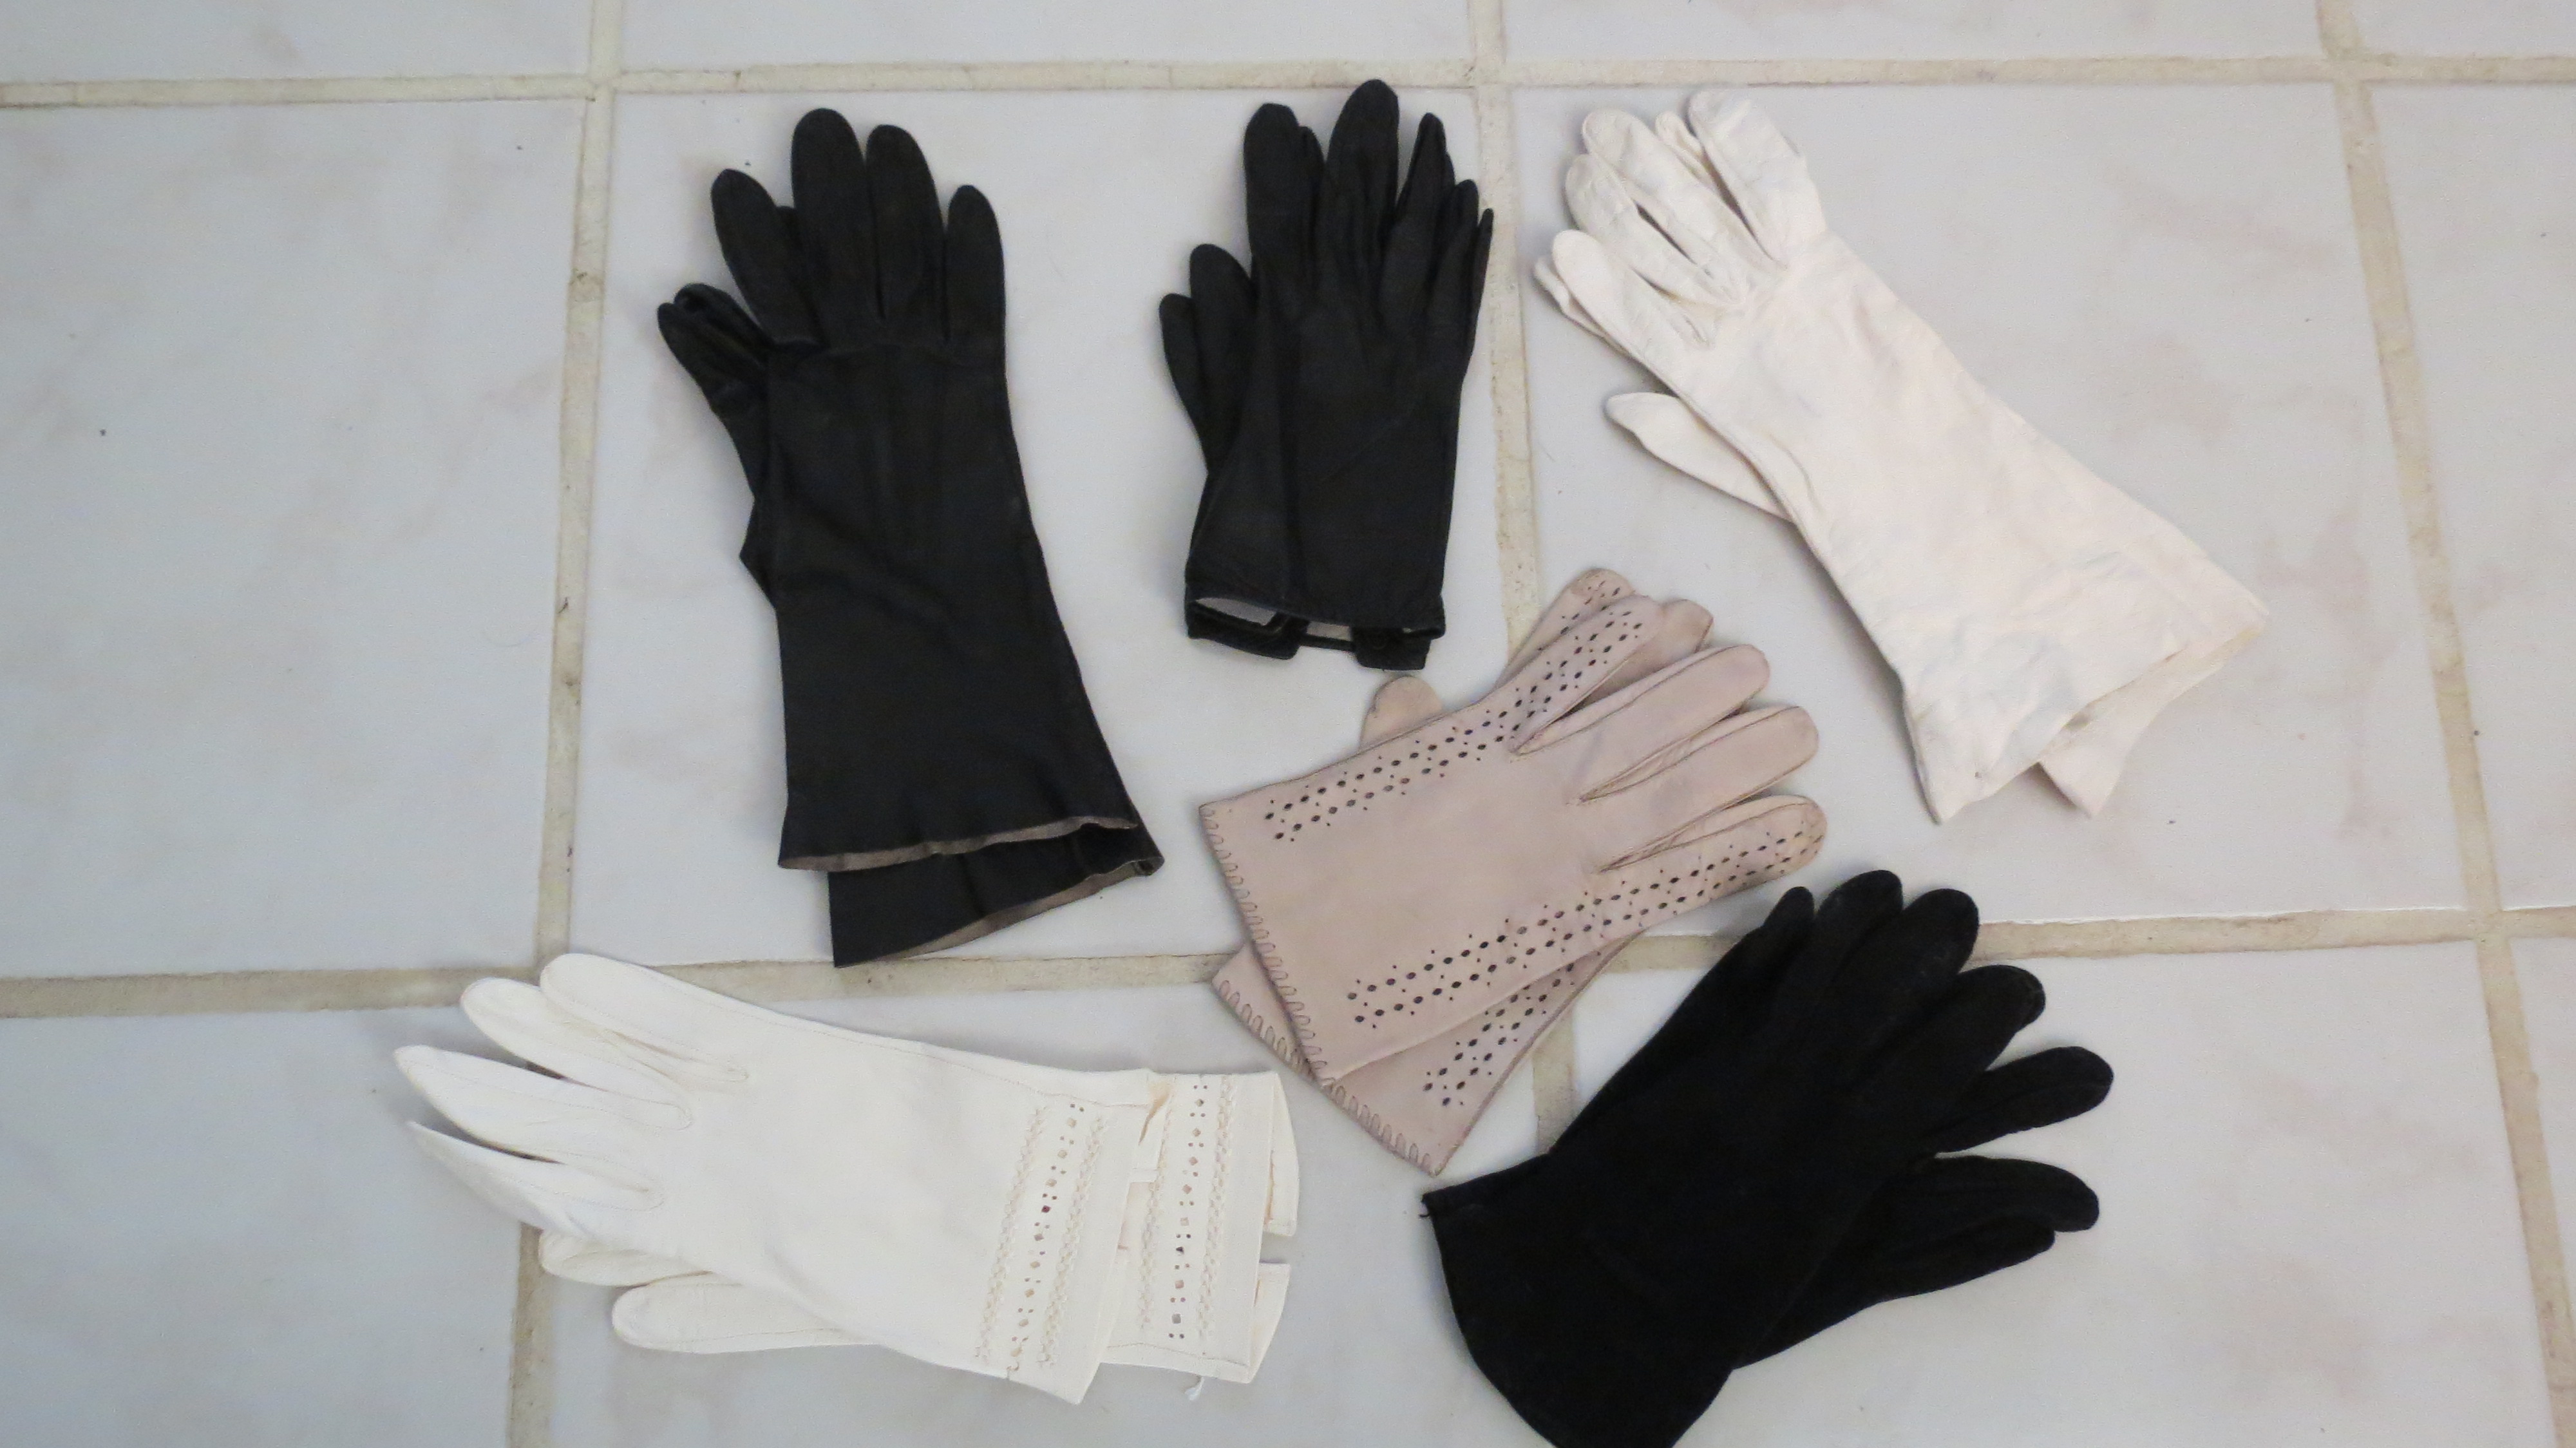 ELEGANT TRUE VINTAGE GLOVES FROM THE 1950'S &amp; '60'S - AN ACCESSORY WORTH COLLECTING